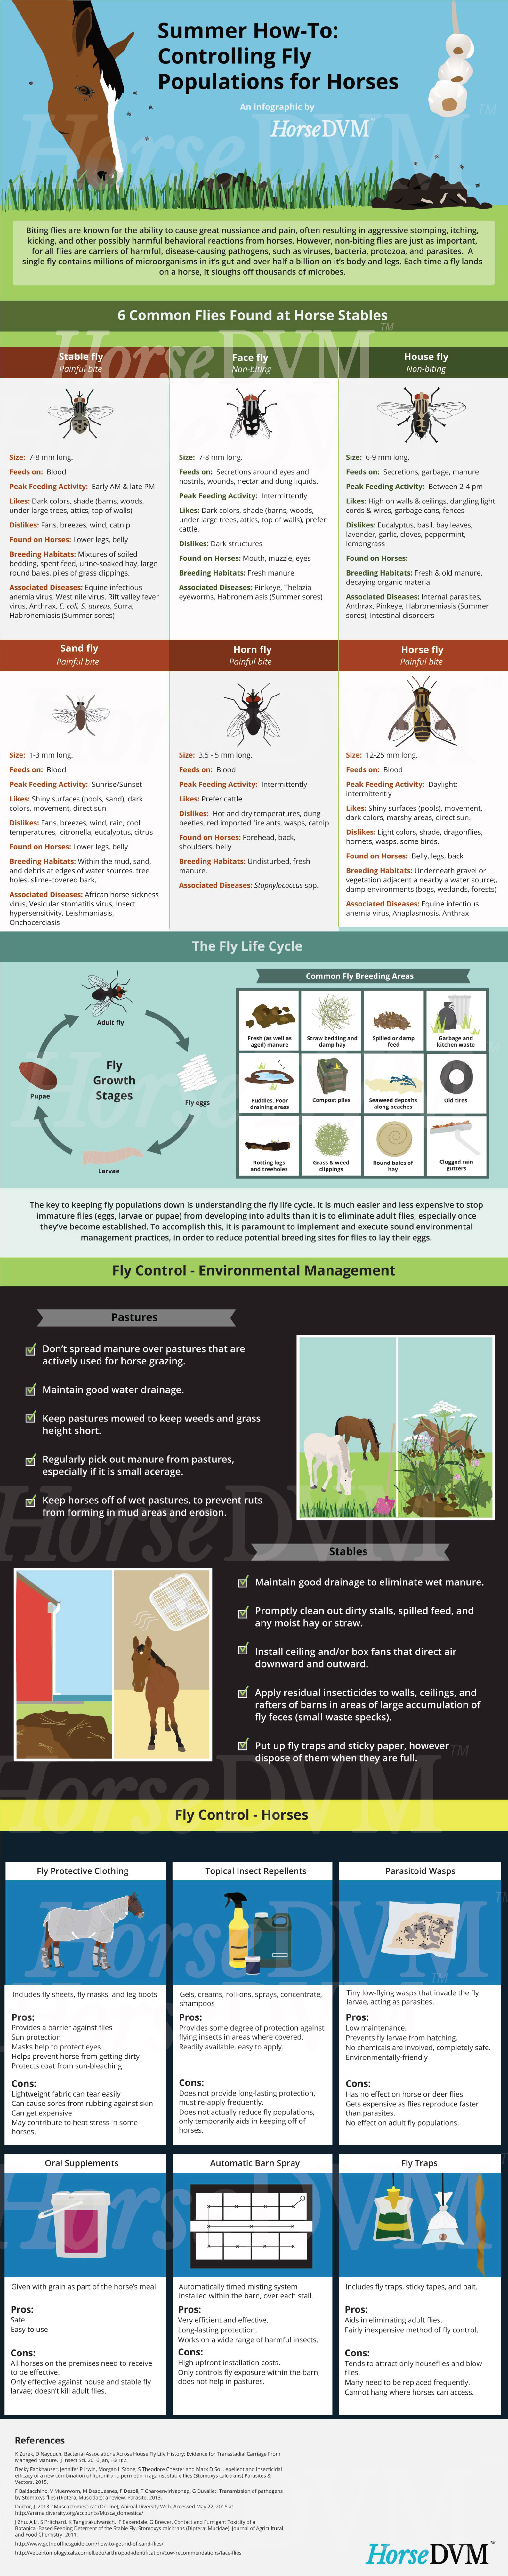 HorseDVM - horsedvm-infographic-controlling-fly-populations-for-horses